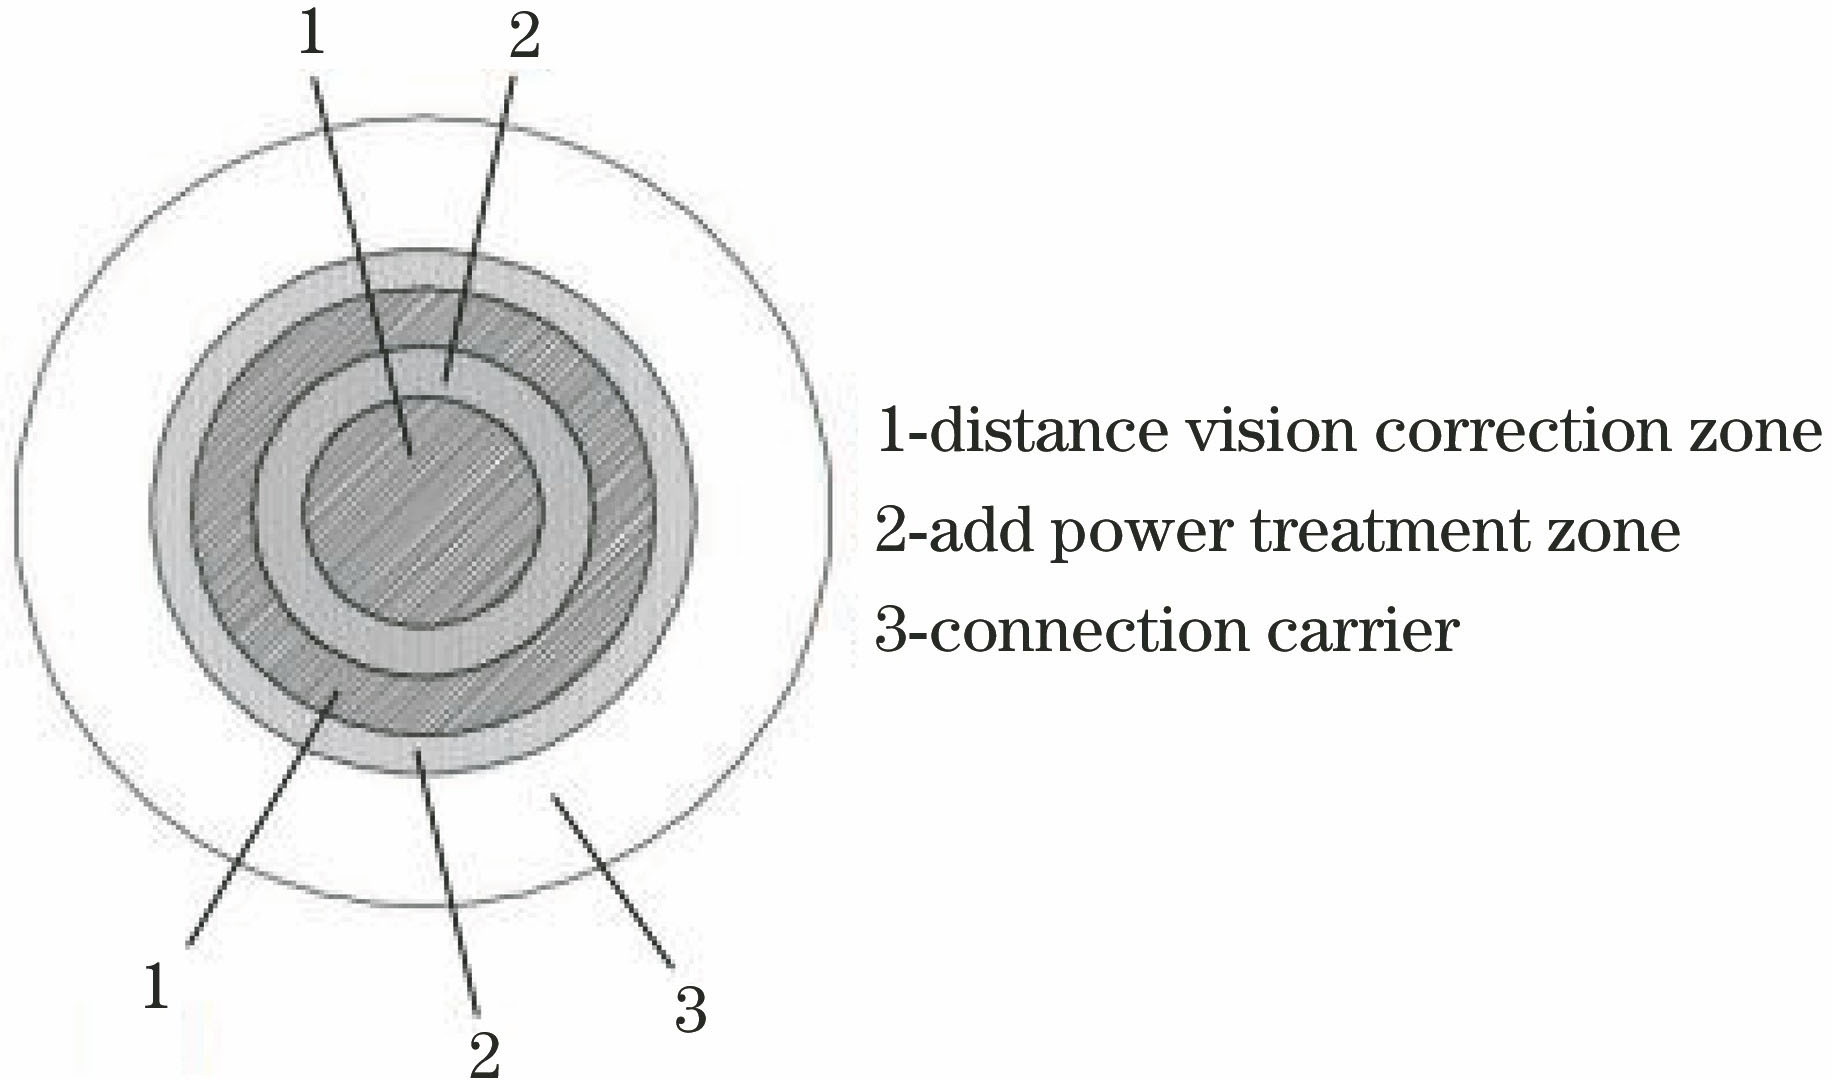 Anterior surface structure of the multi-zone aspheric contact lens